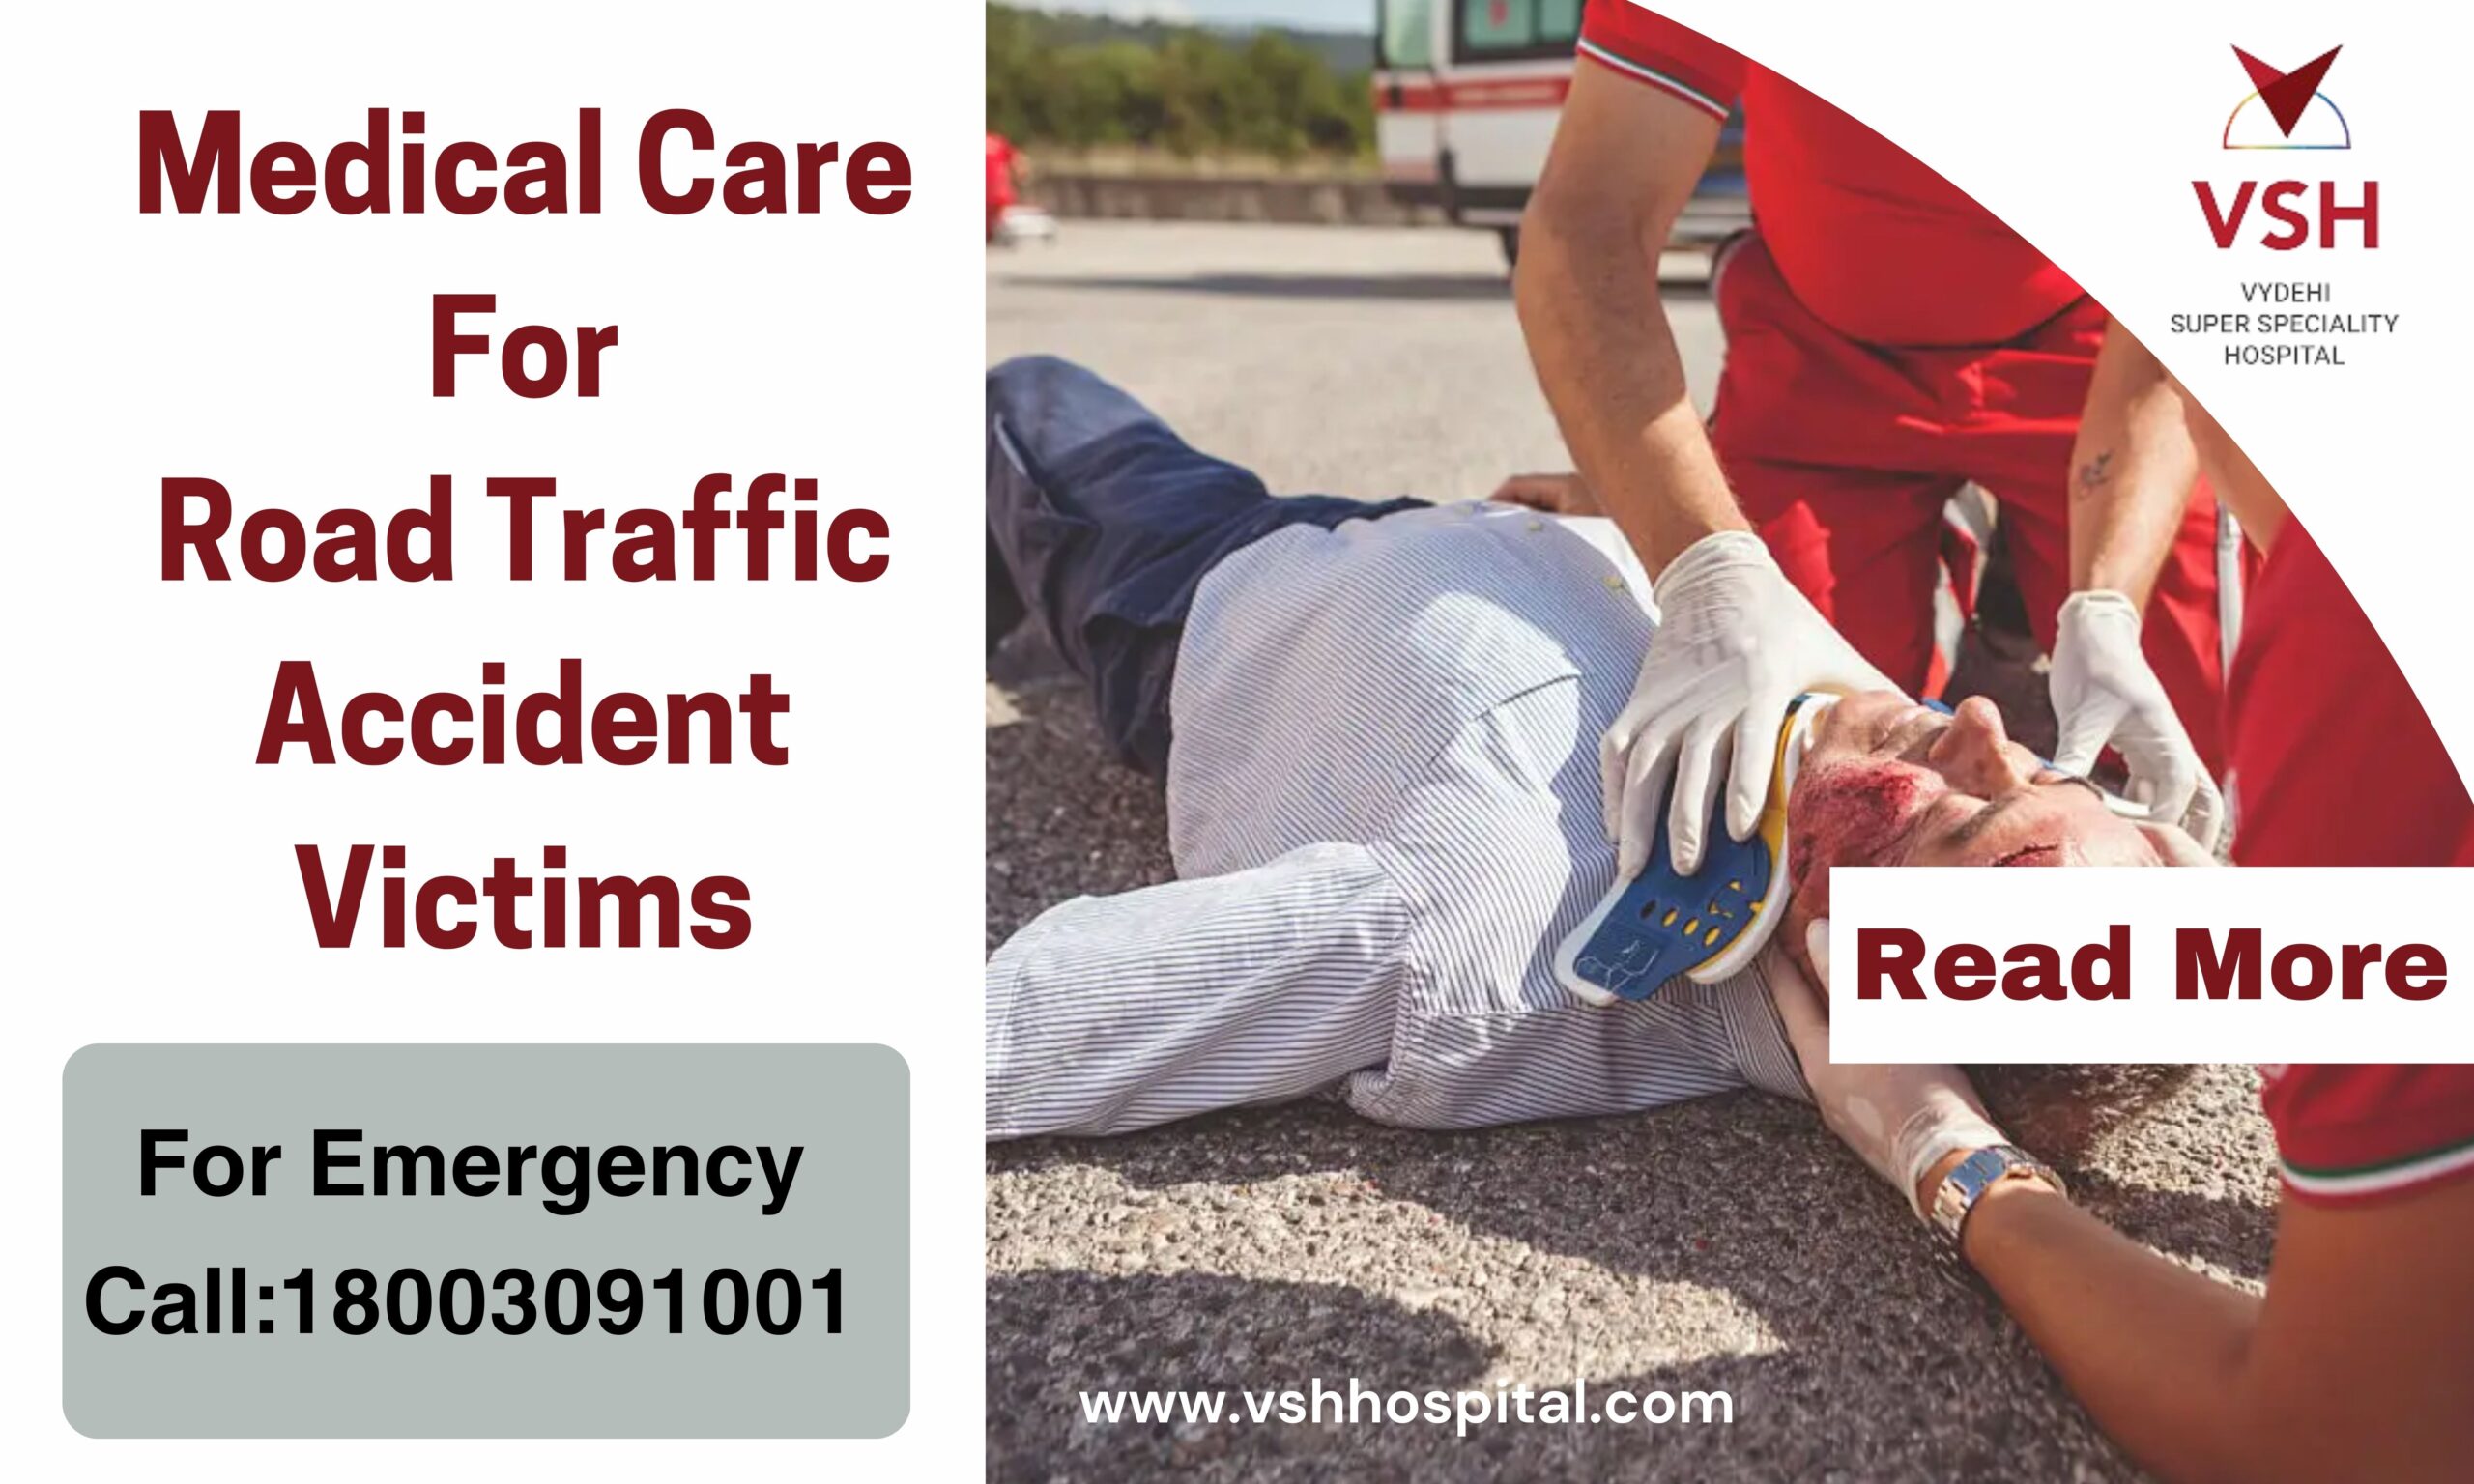 The Importance of Immediate Medical Care for Road Traffic Accident Victims